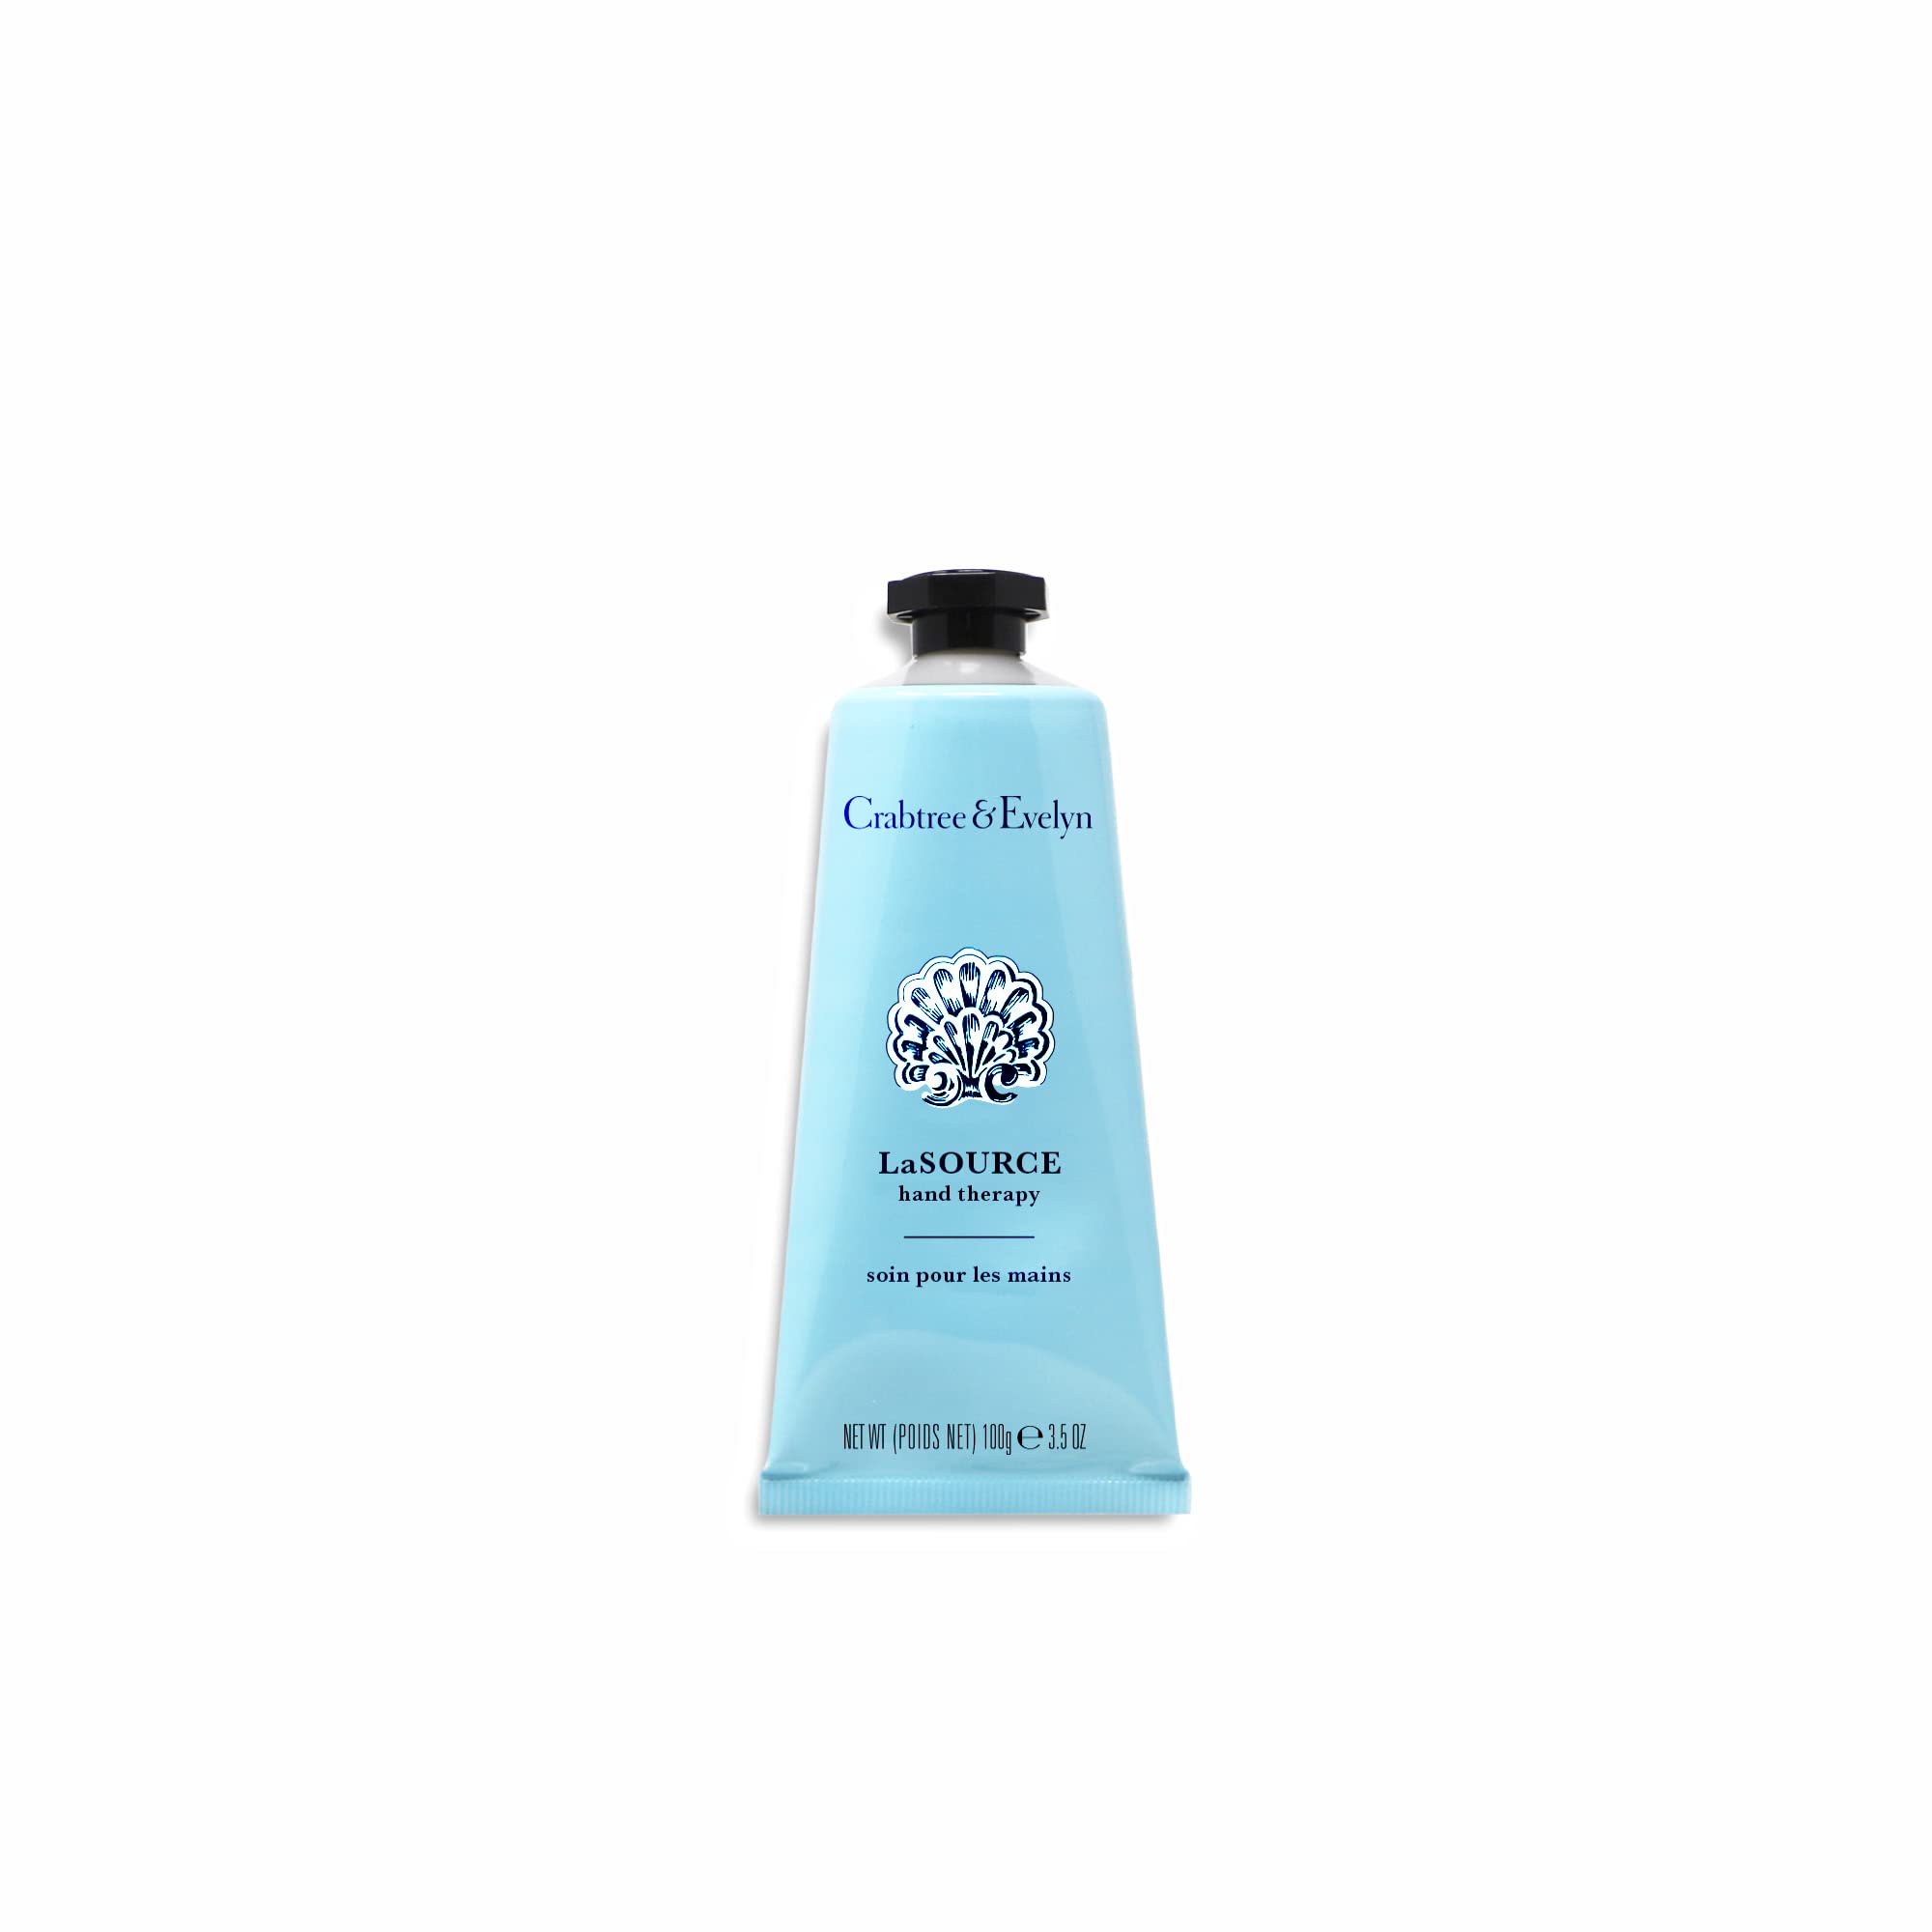 Crabtree & Evelyn La Source Hand Therapy - Nourishing & Smoothing 3.5 oz Lotion